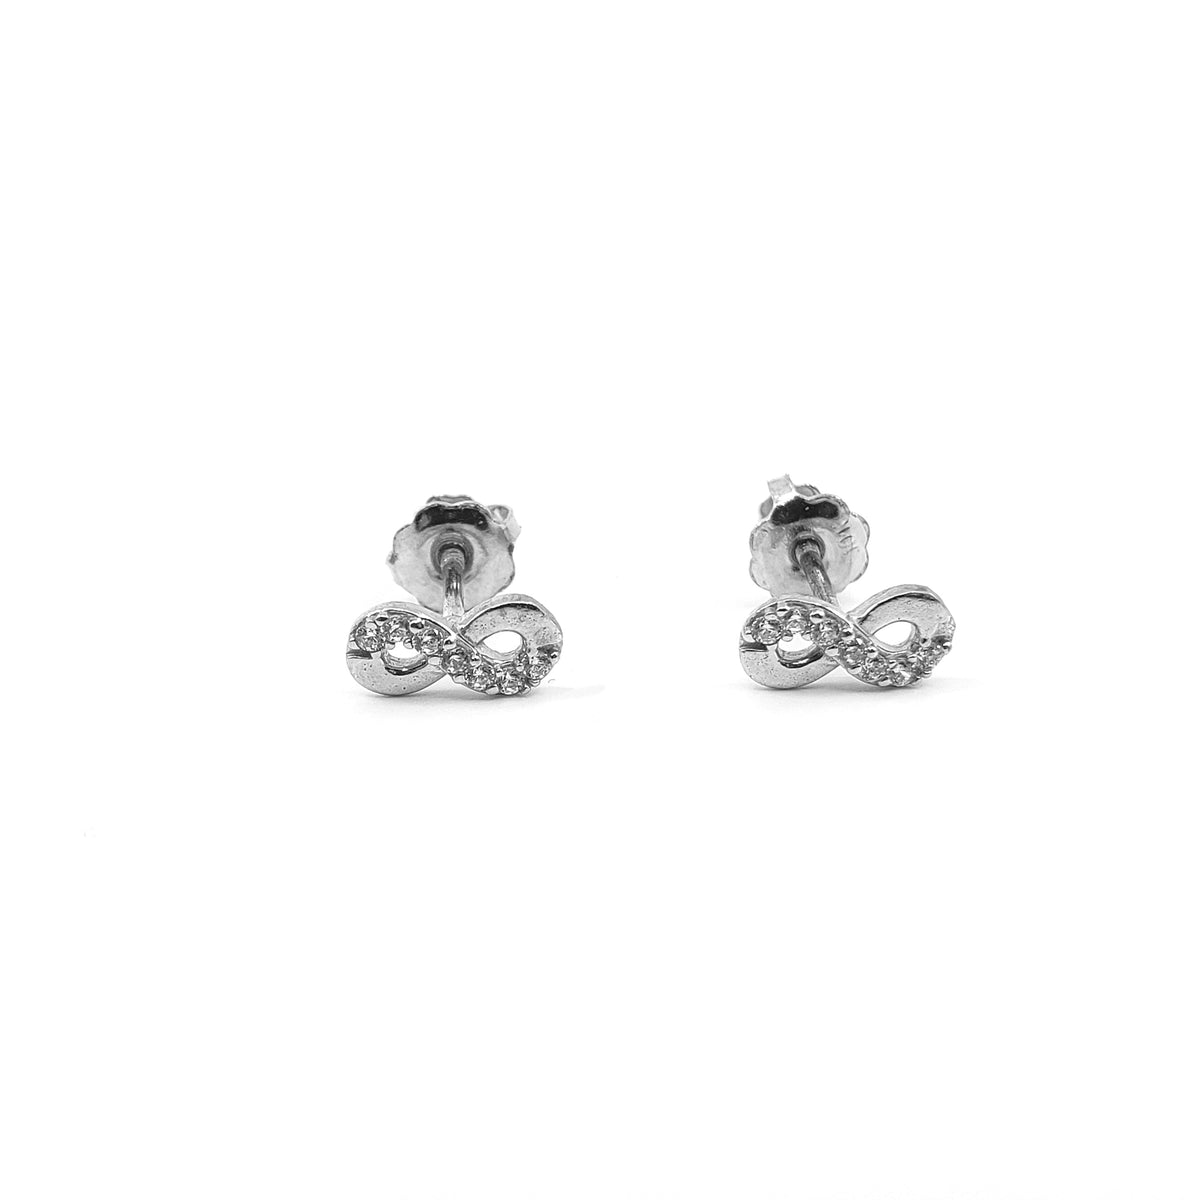 10K White Gold Cubic Zirconia Infinity Studs with Screw Back - 8mm x 3mm